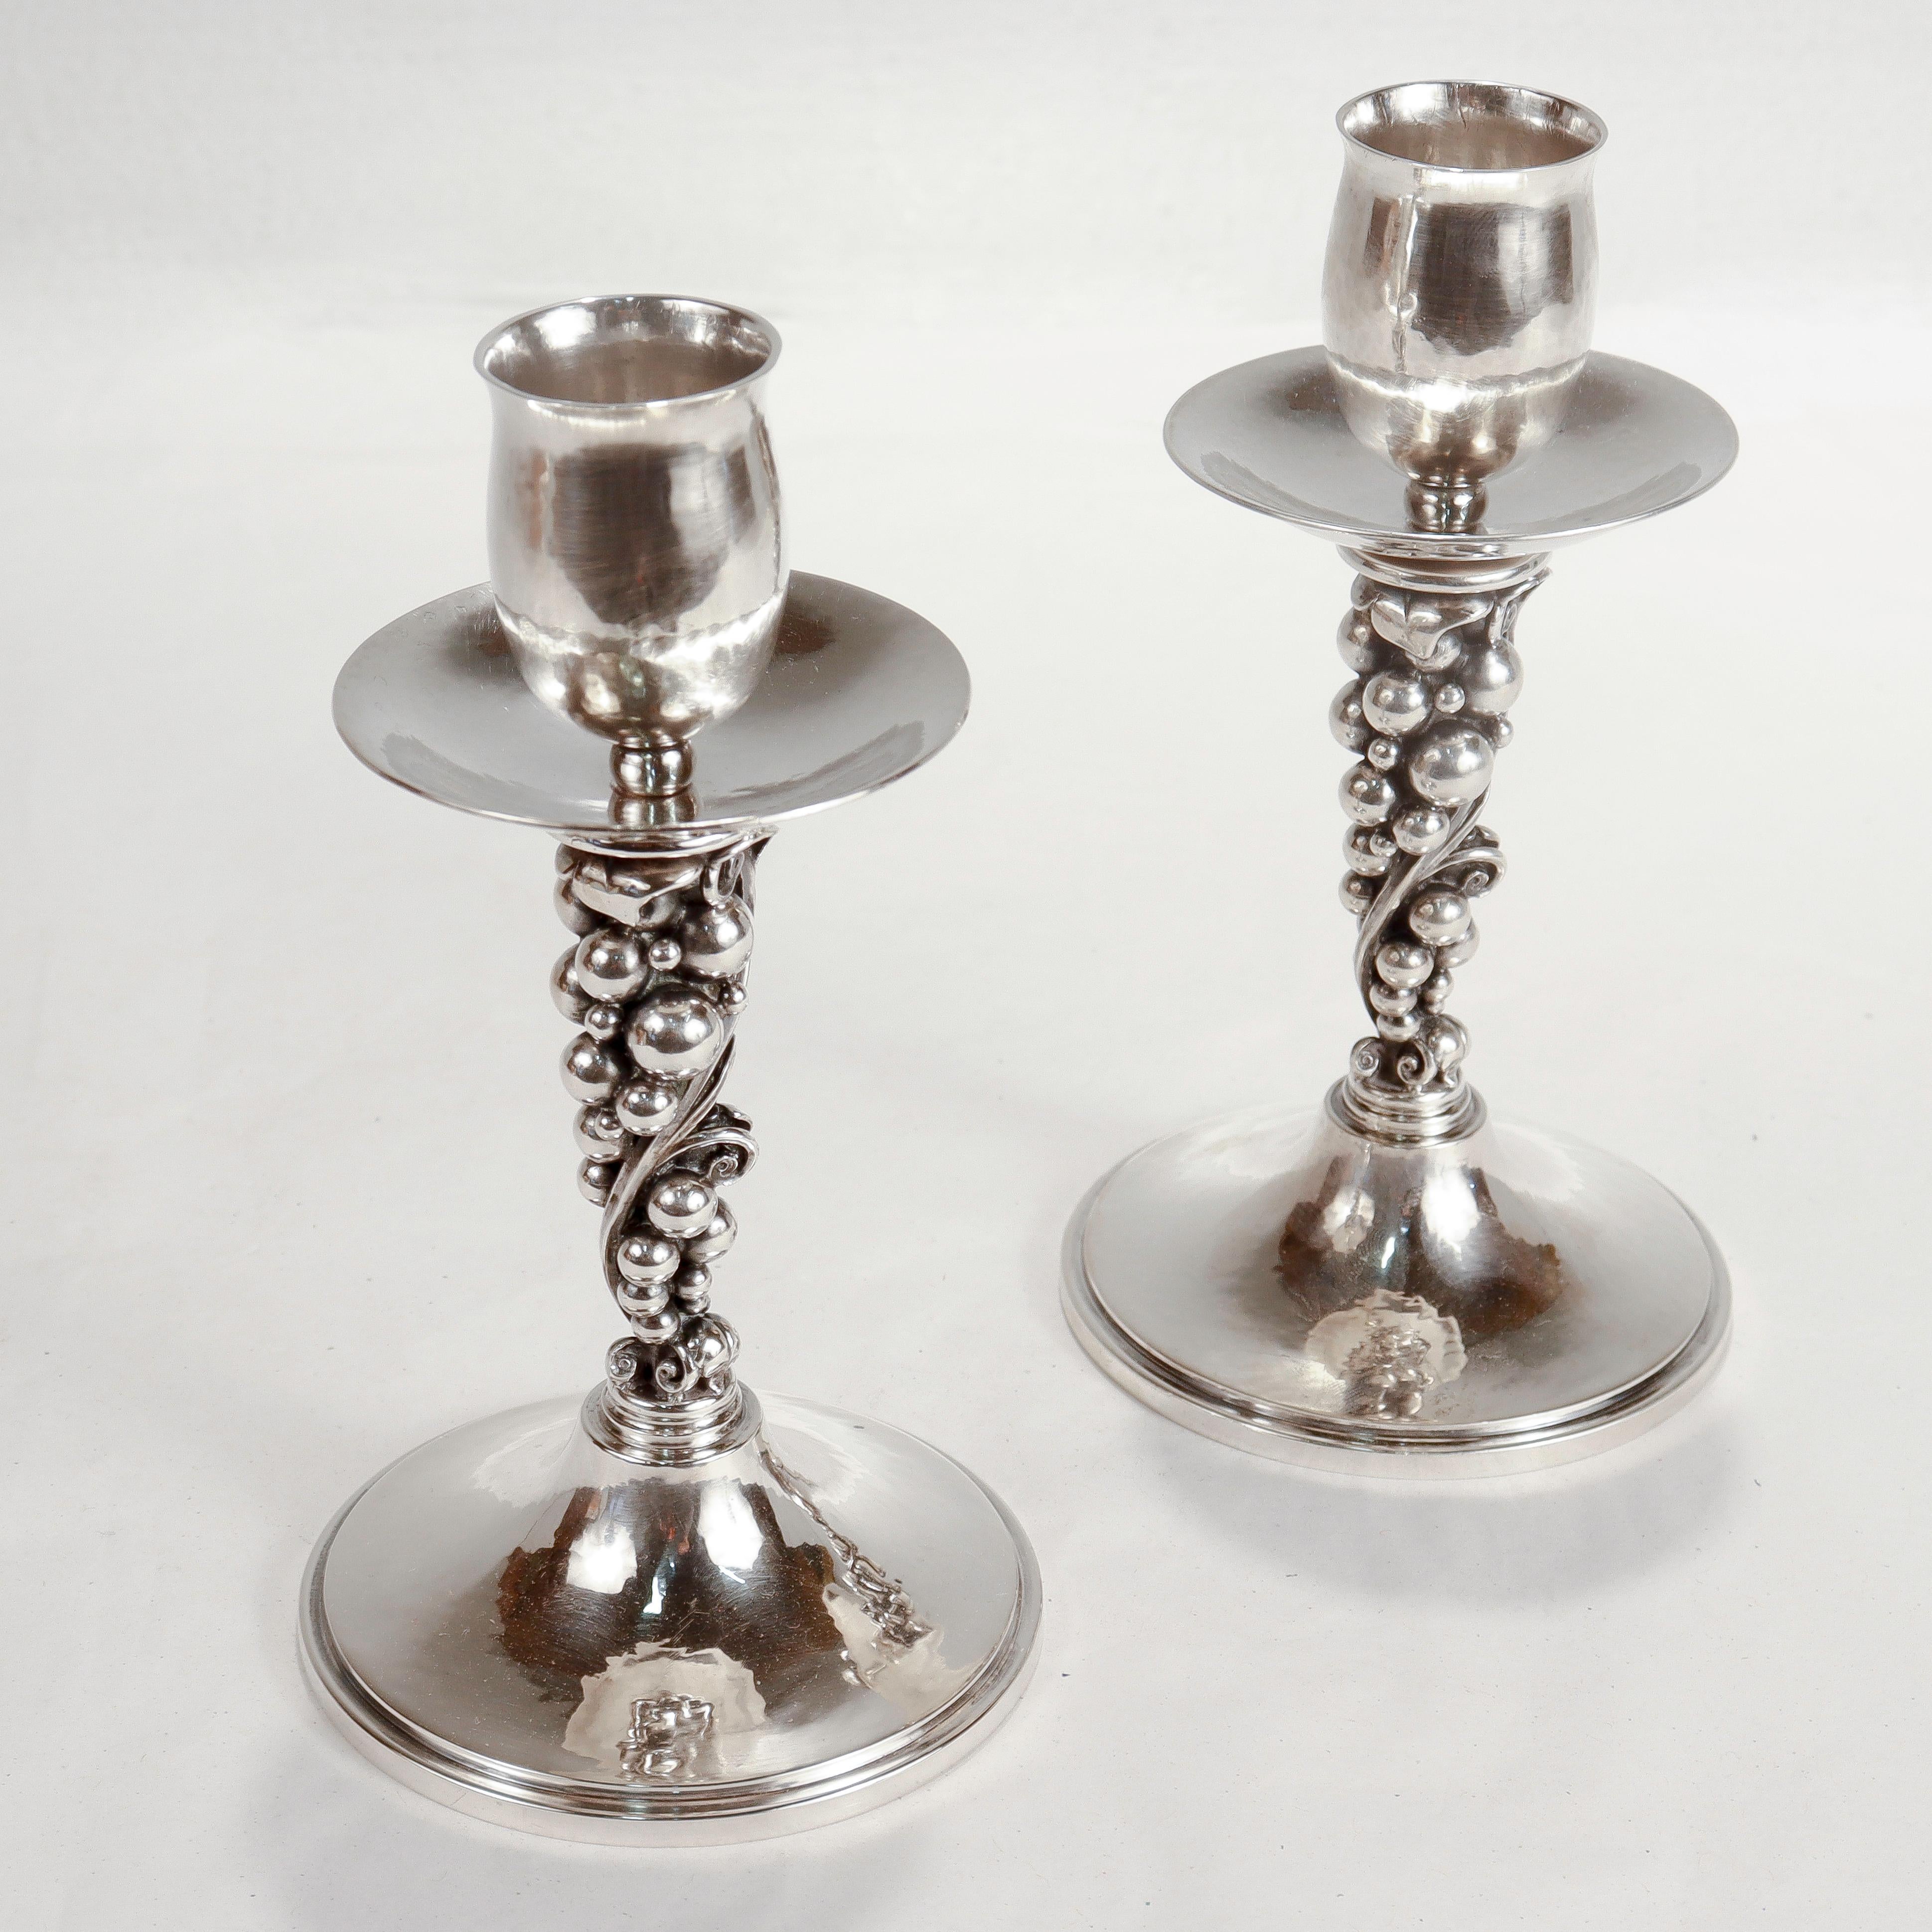 Pair of Signed Danish Modern Sterling Silver Grapes Candlesticks by Aage Weimar For Sale 2